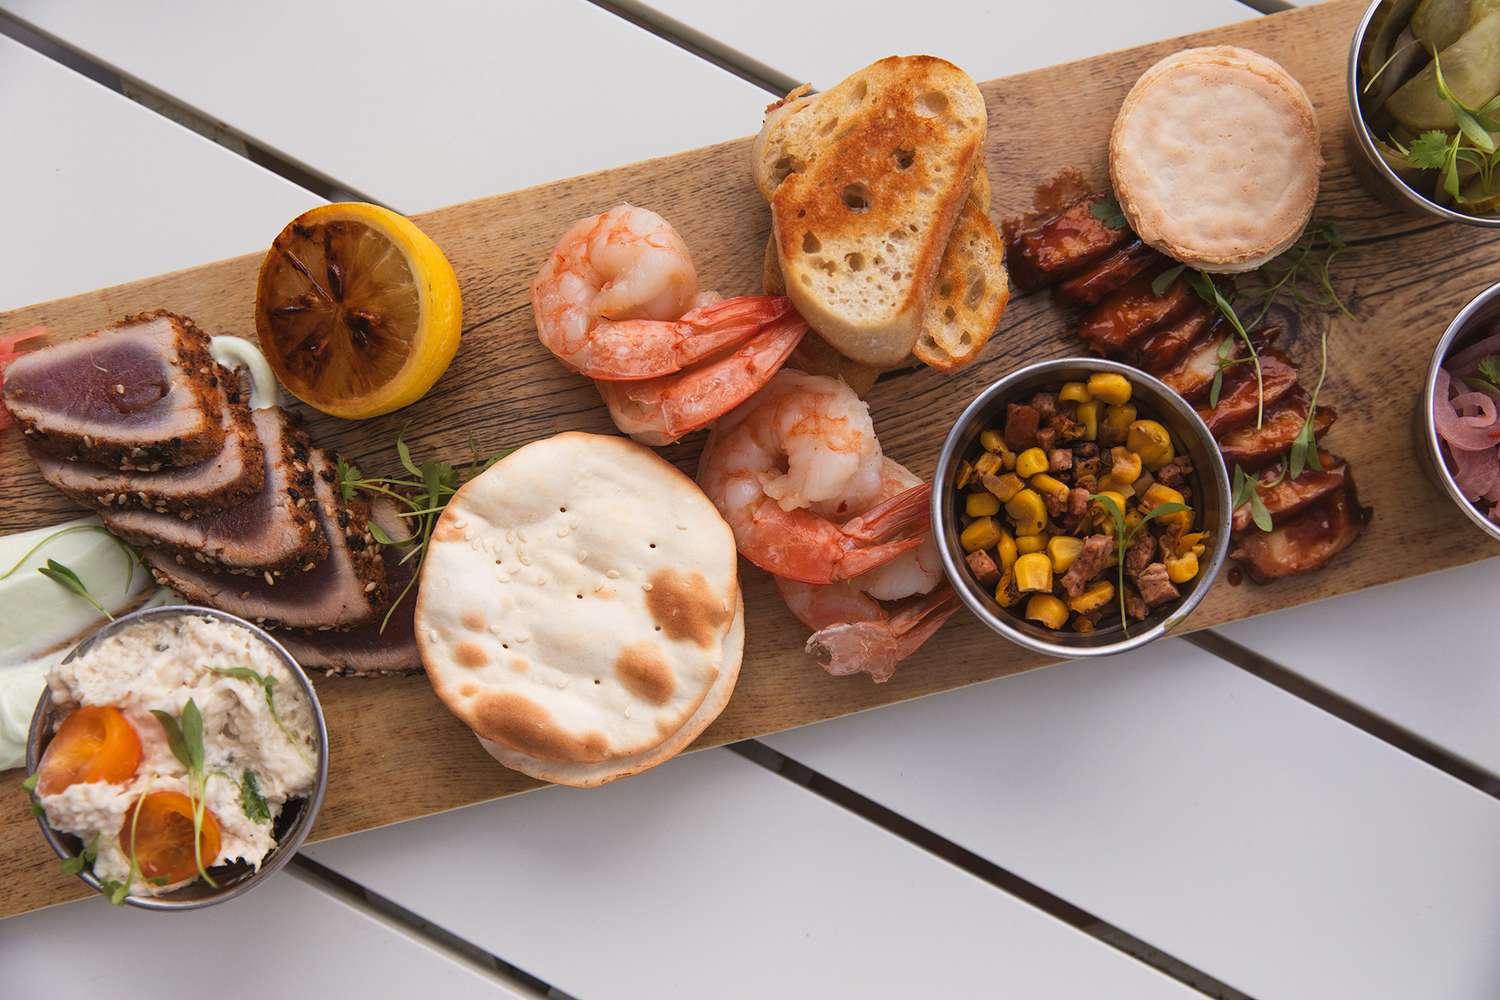 The Top Shell Sea-Cuterie board at The Singer Oceanfront Resort